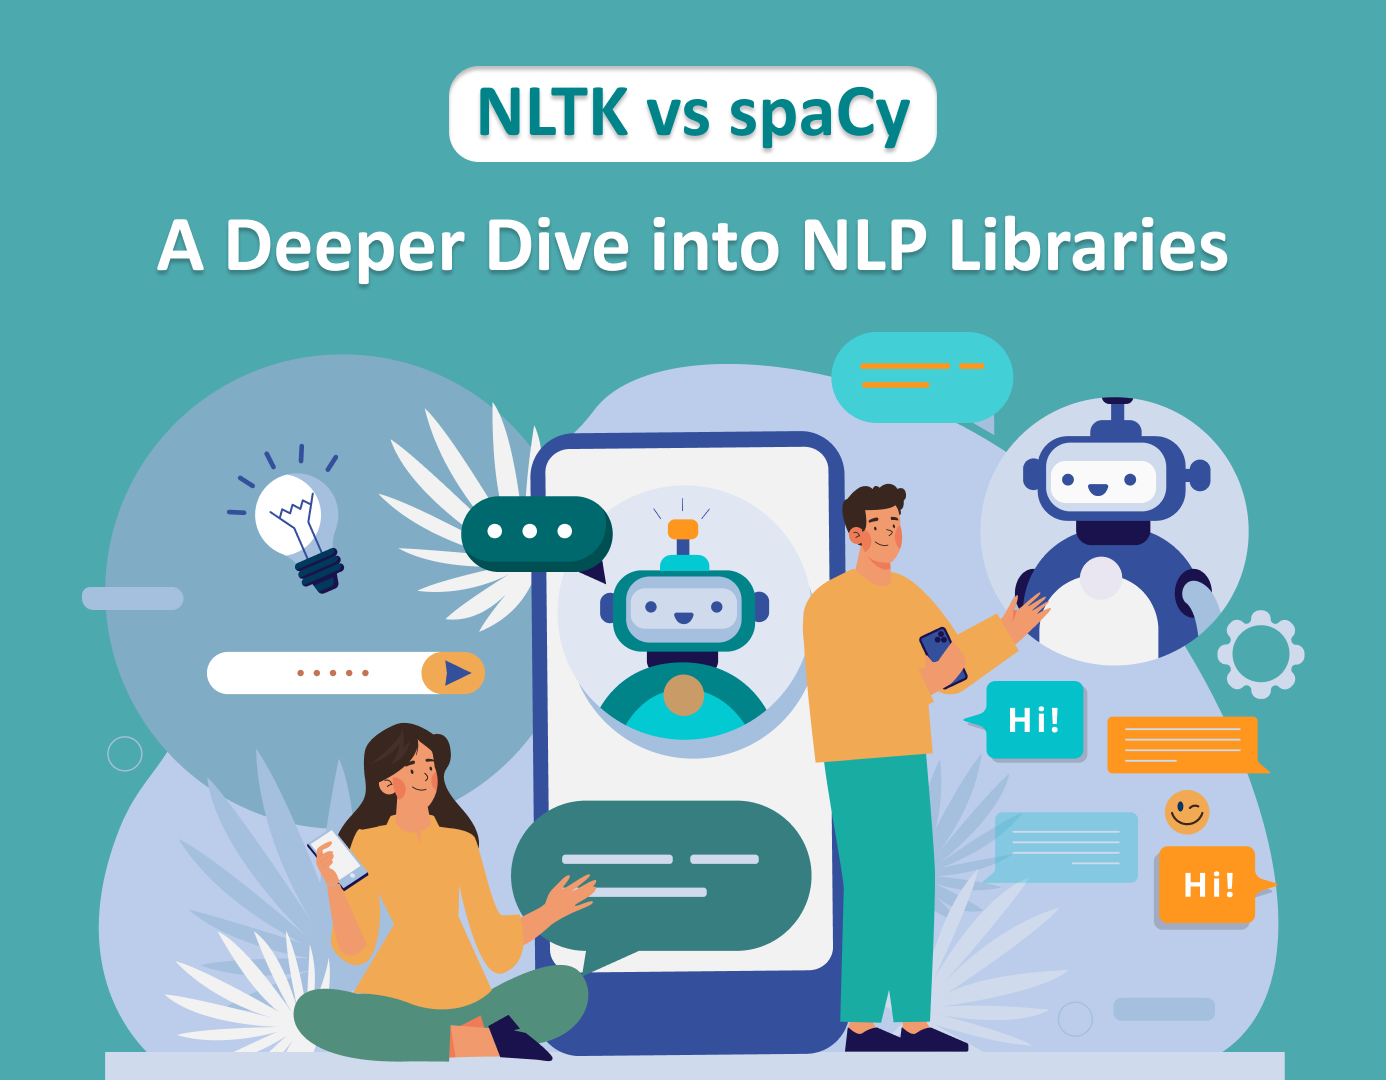 NLTK vs spaCy comparison infographic showcasing key features, strengths, and future trends in natural language processing.